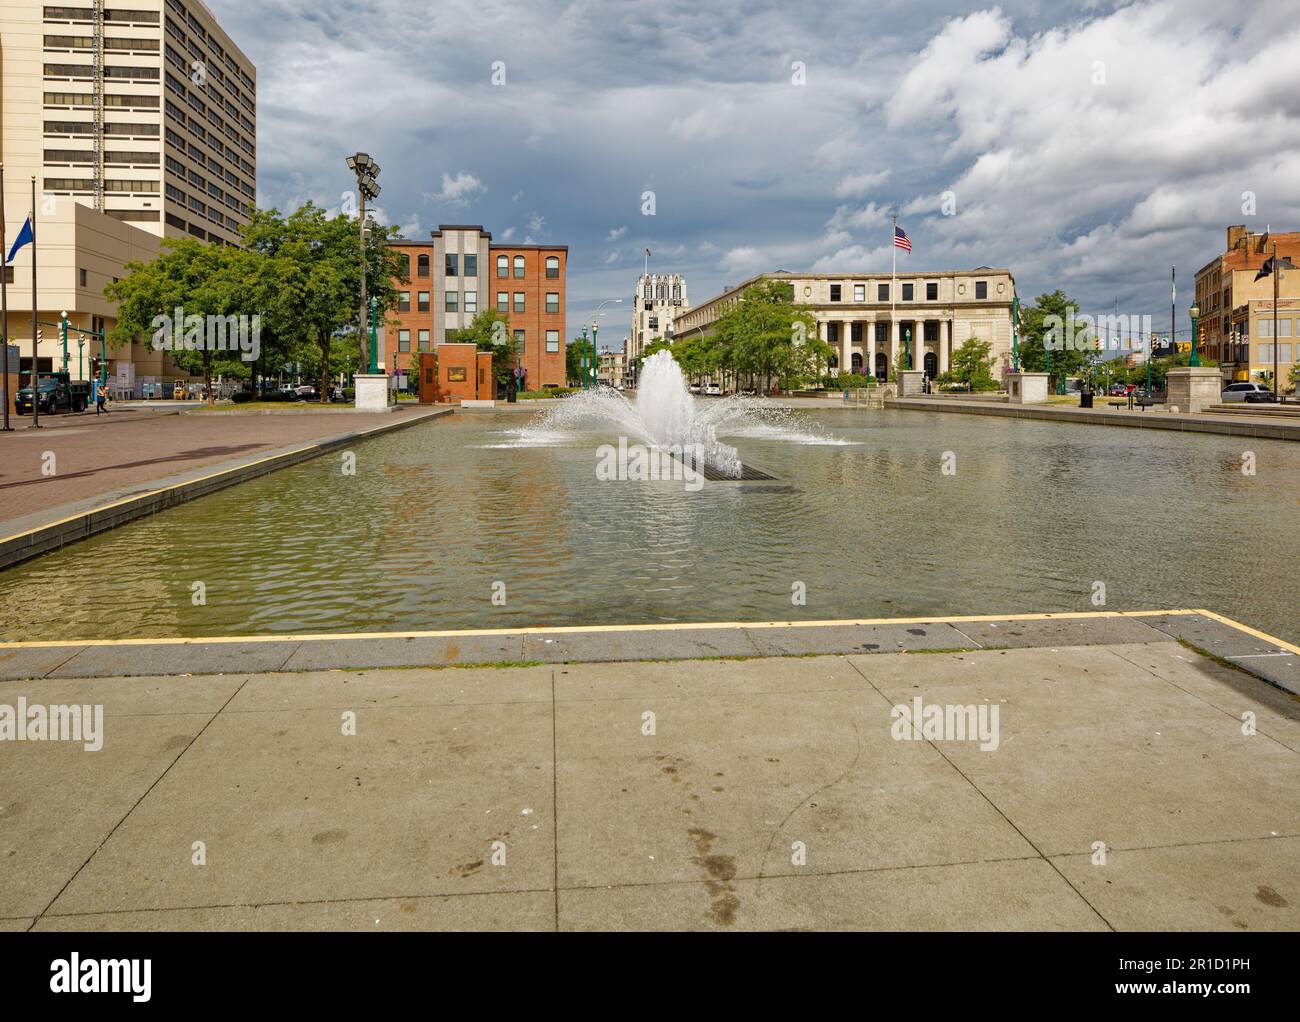 Westlich des Clinton Square Reflecting Pool: Social Security Administration; Red Brick 200 West Water Street; Clinton Exchange; West Genesee Street. Stockfoto